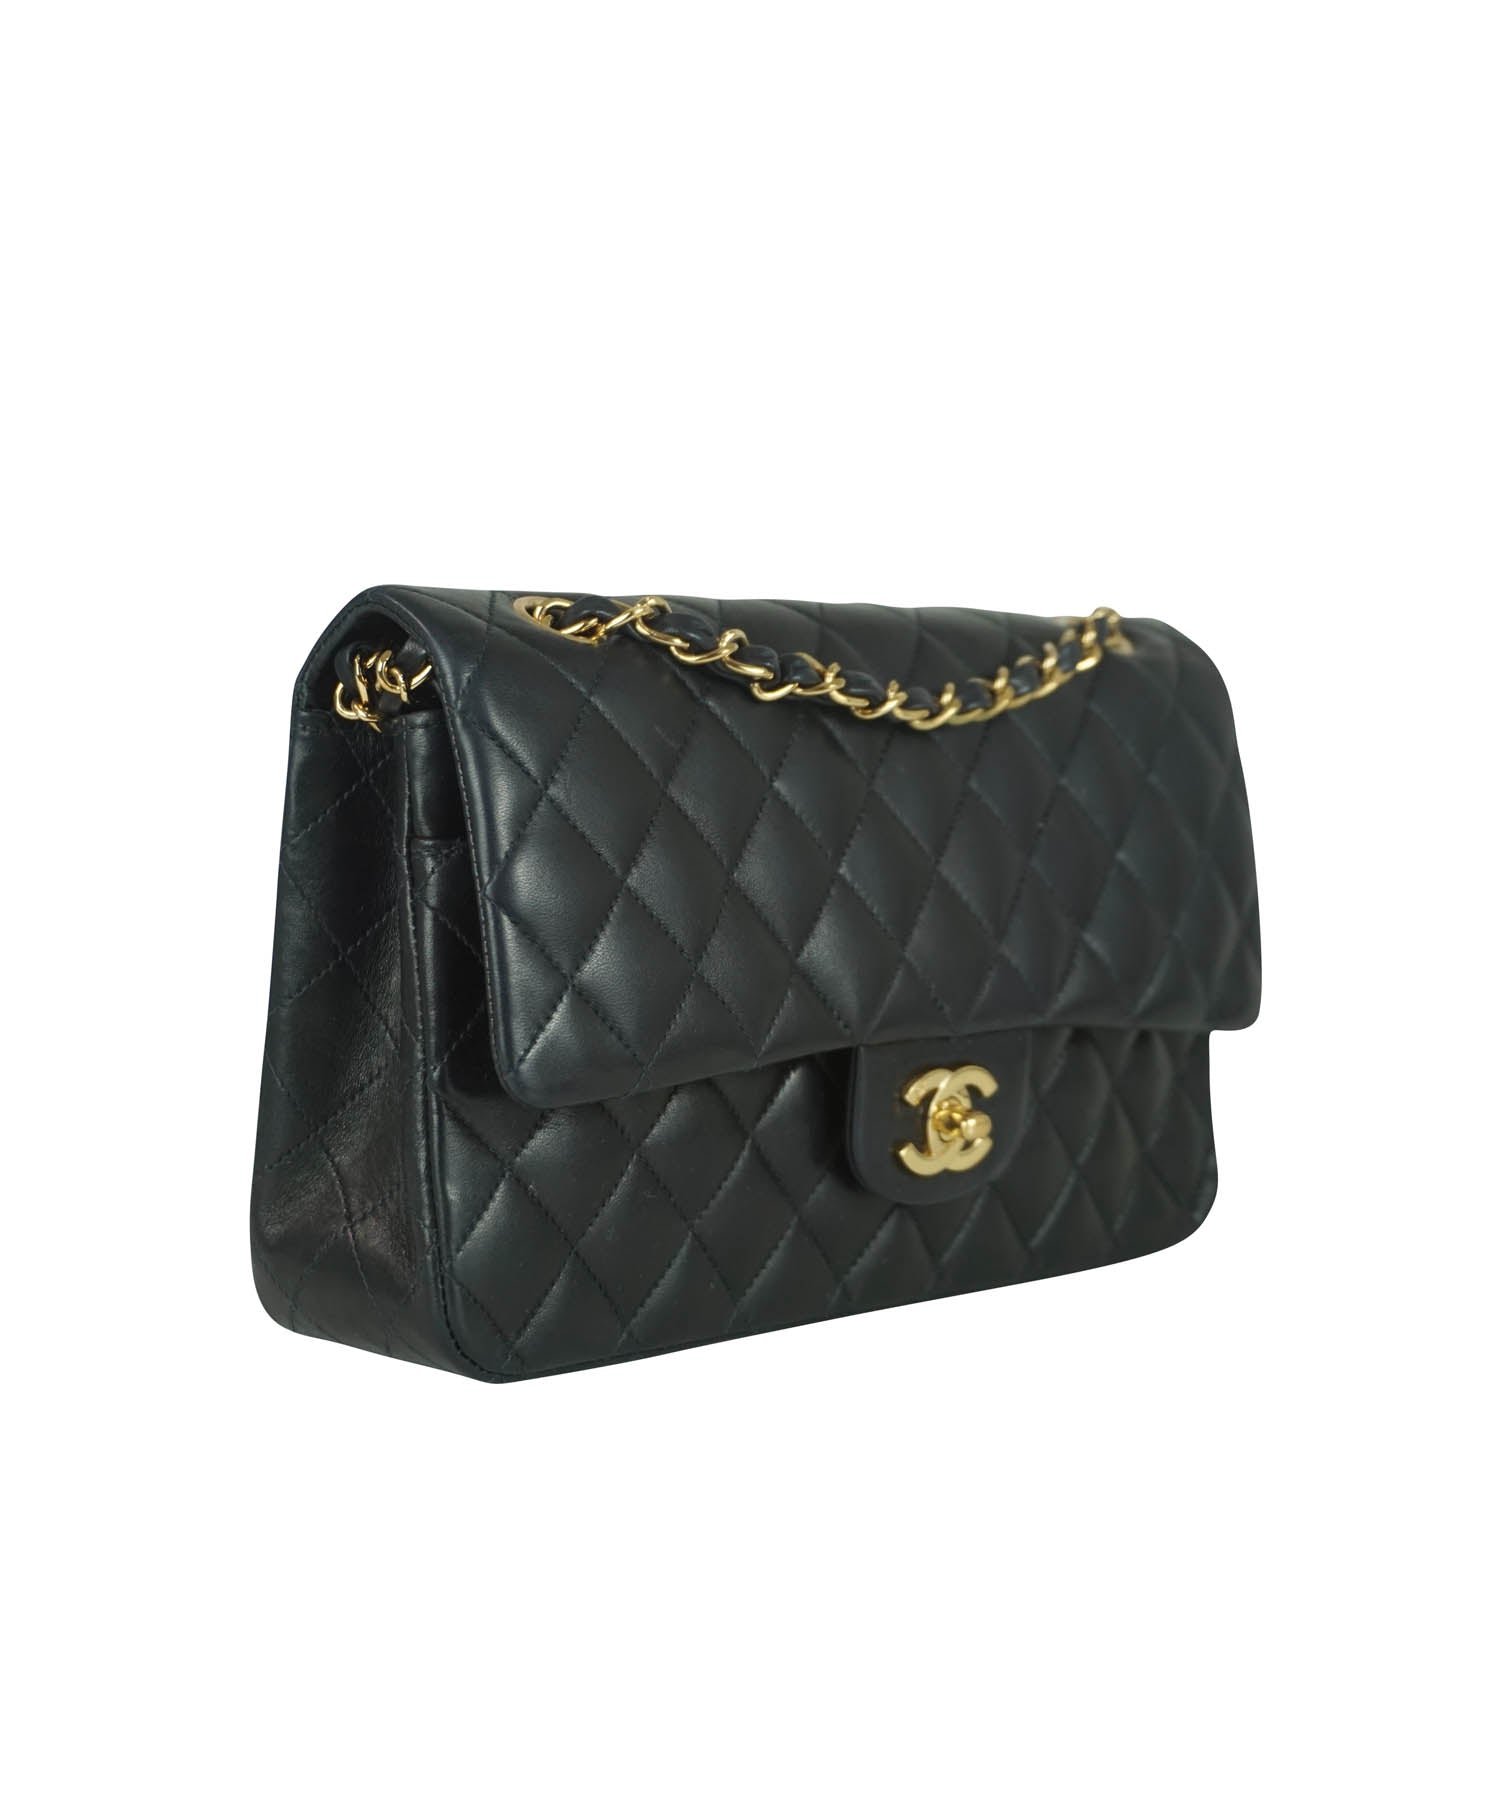 CHANEL, Bags, Chanel Black Lambskin Quilted Chanel 9 Pouch Clutch Bag